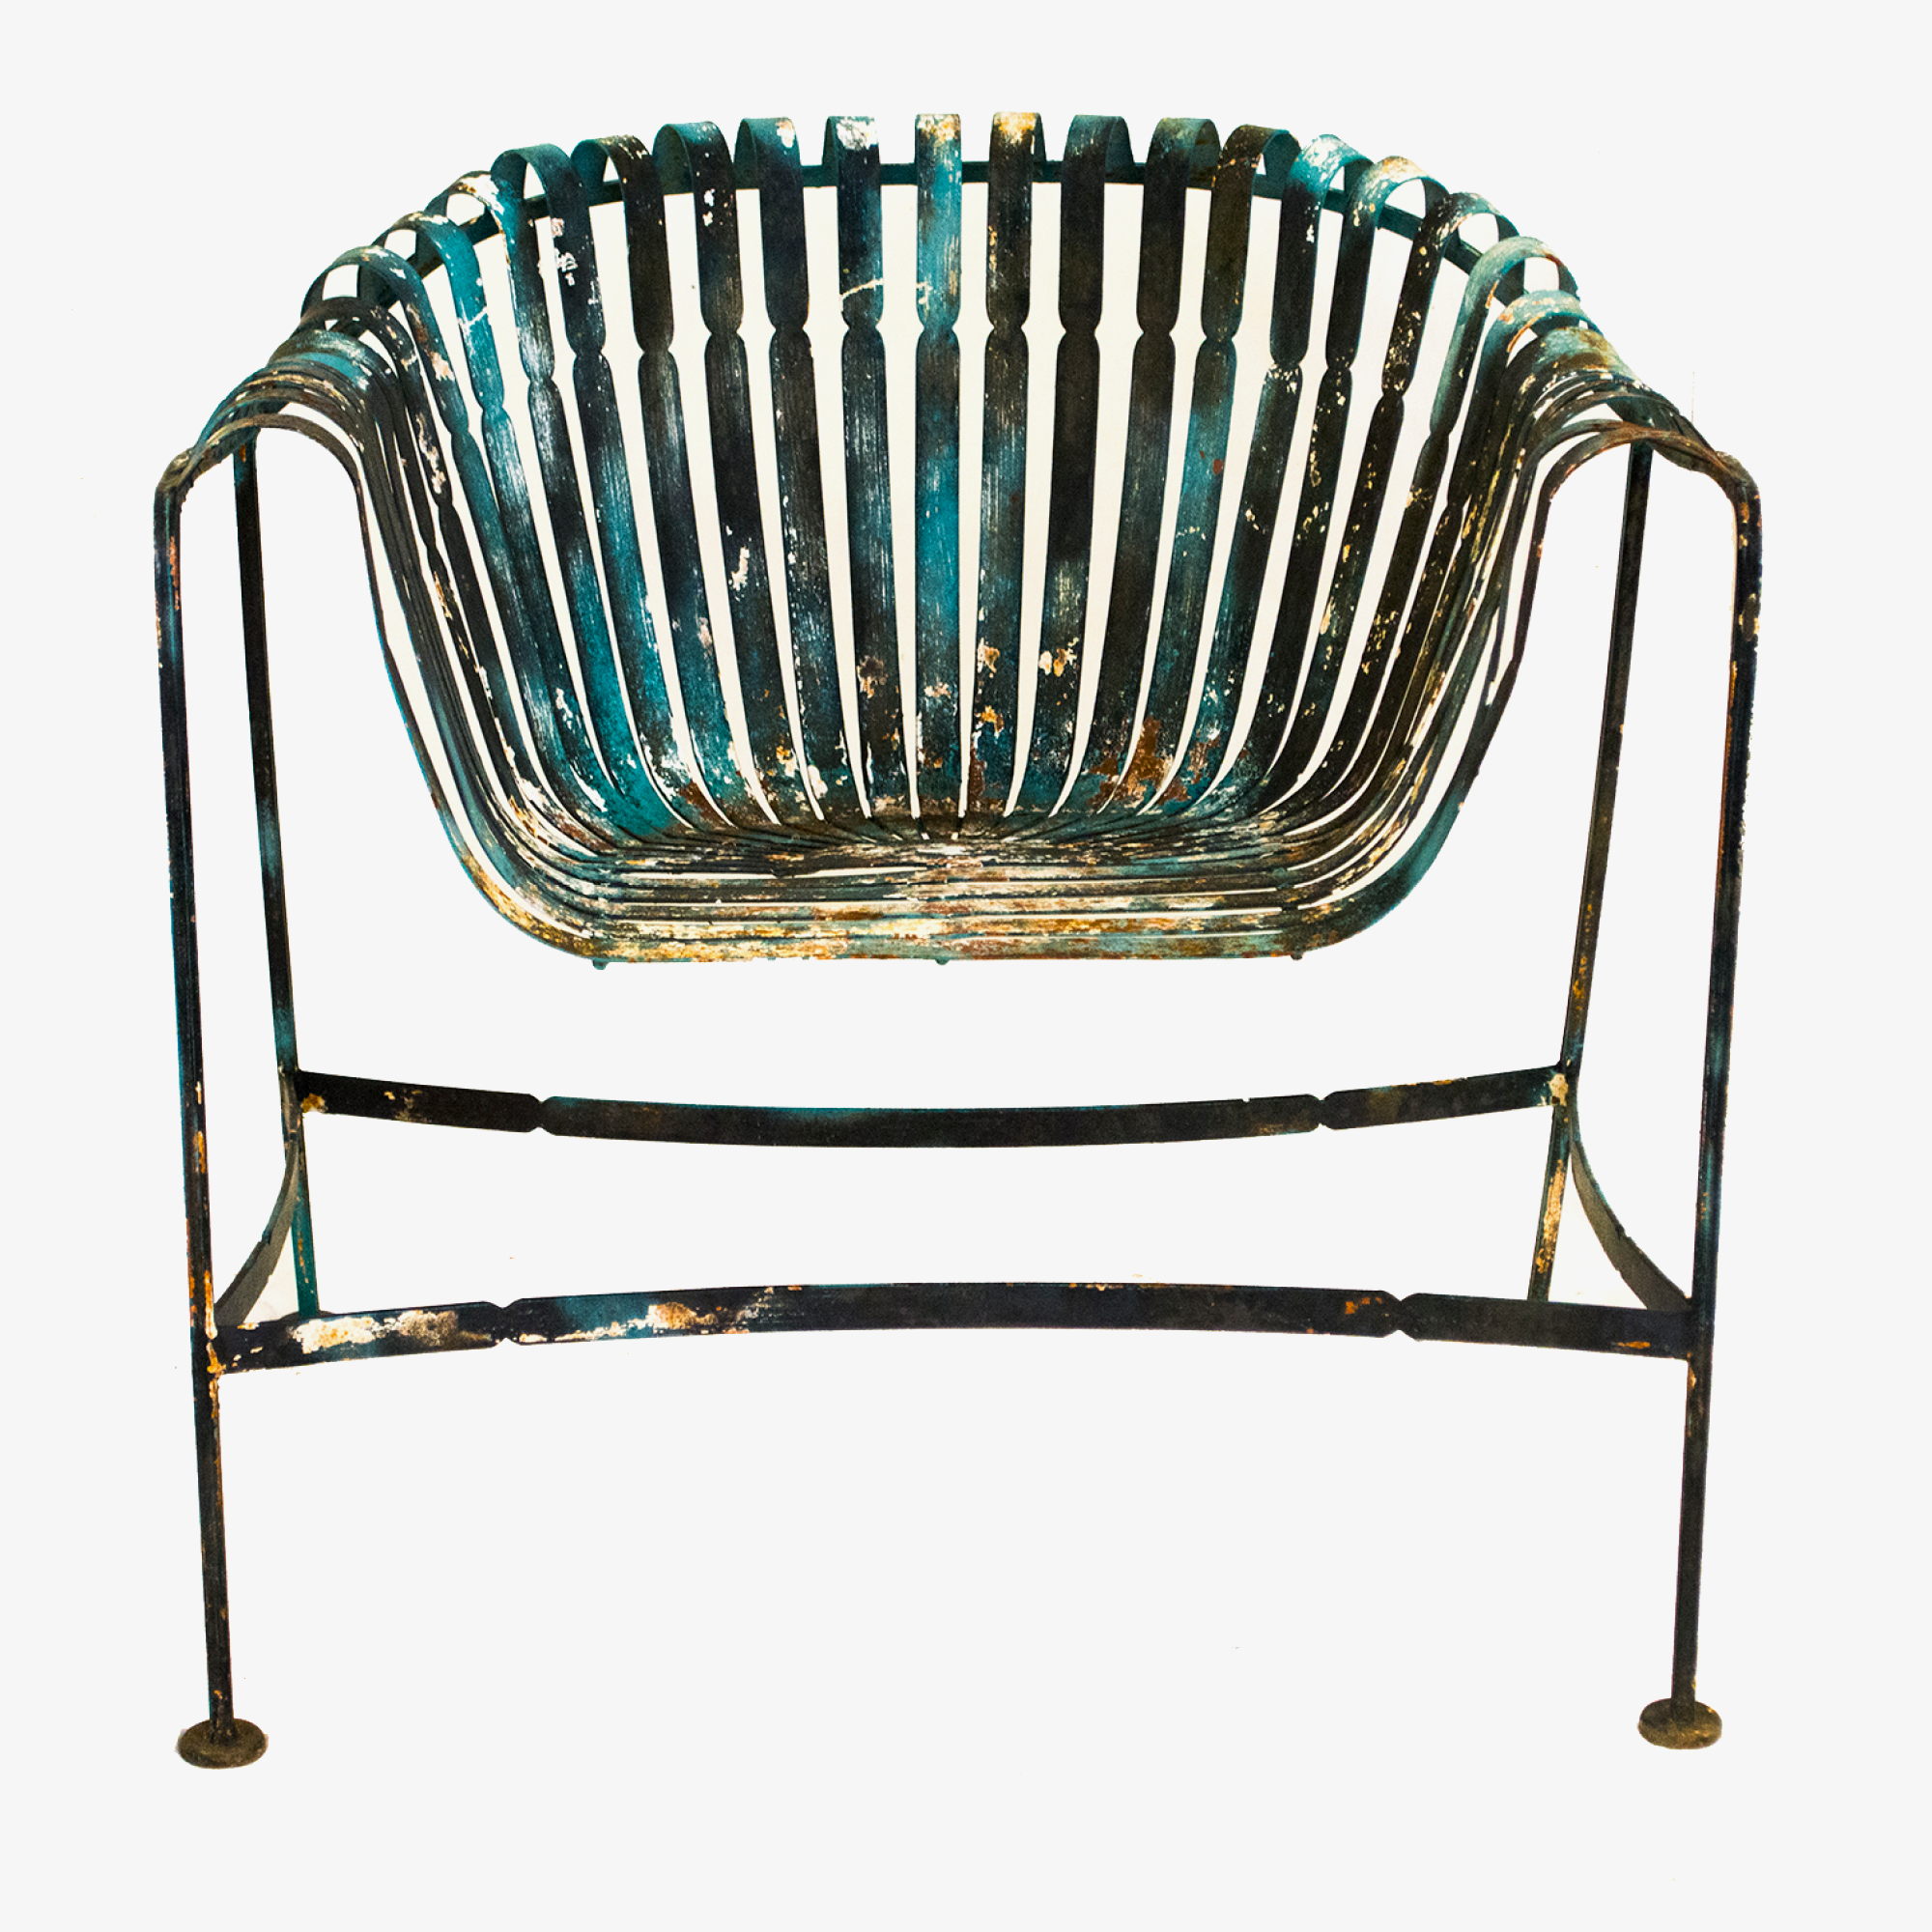 French Garden Chairs by Woodard 3.png